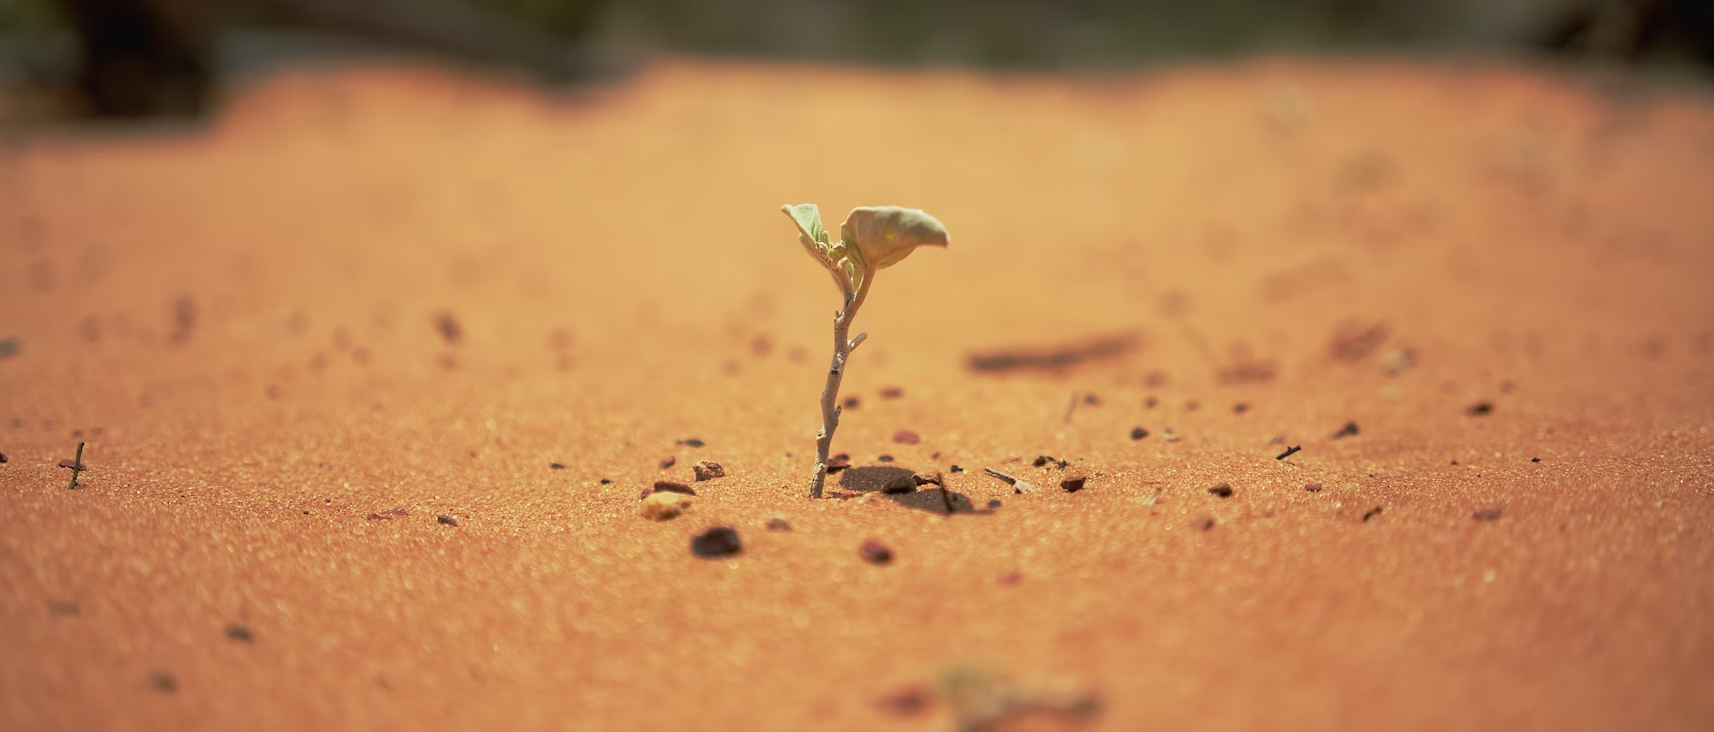 A single plant growing in a desert to represent job satisfaction with leadership development.